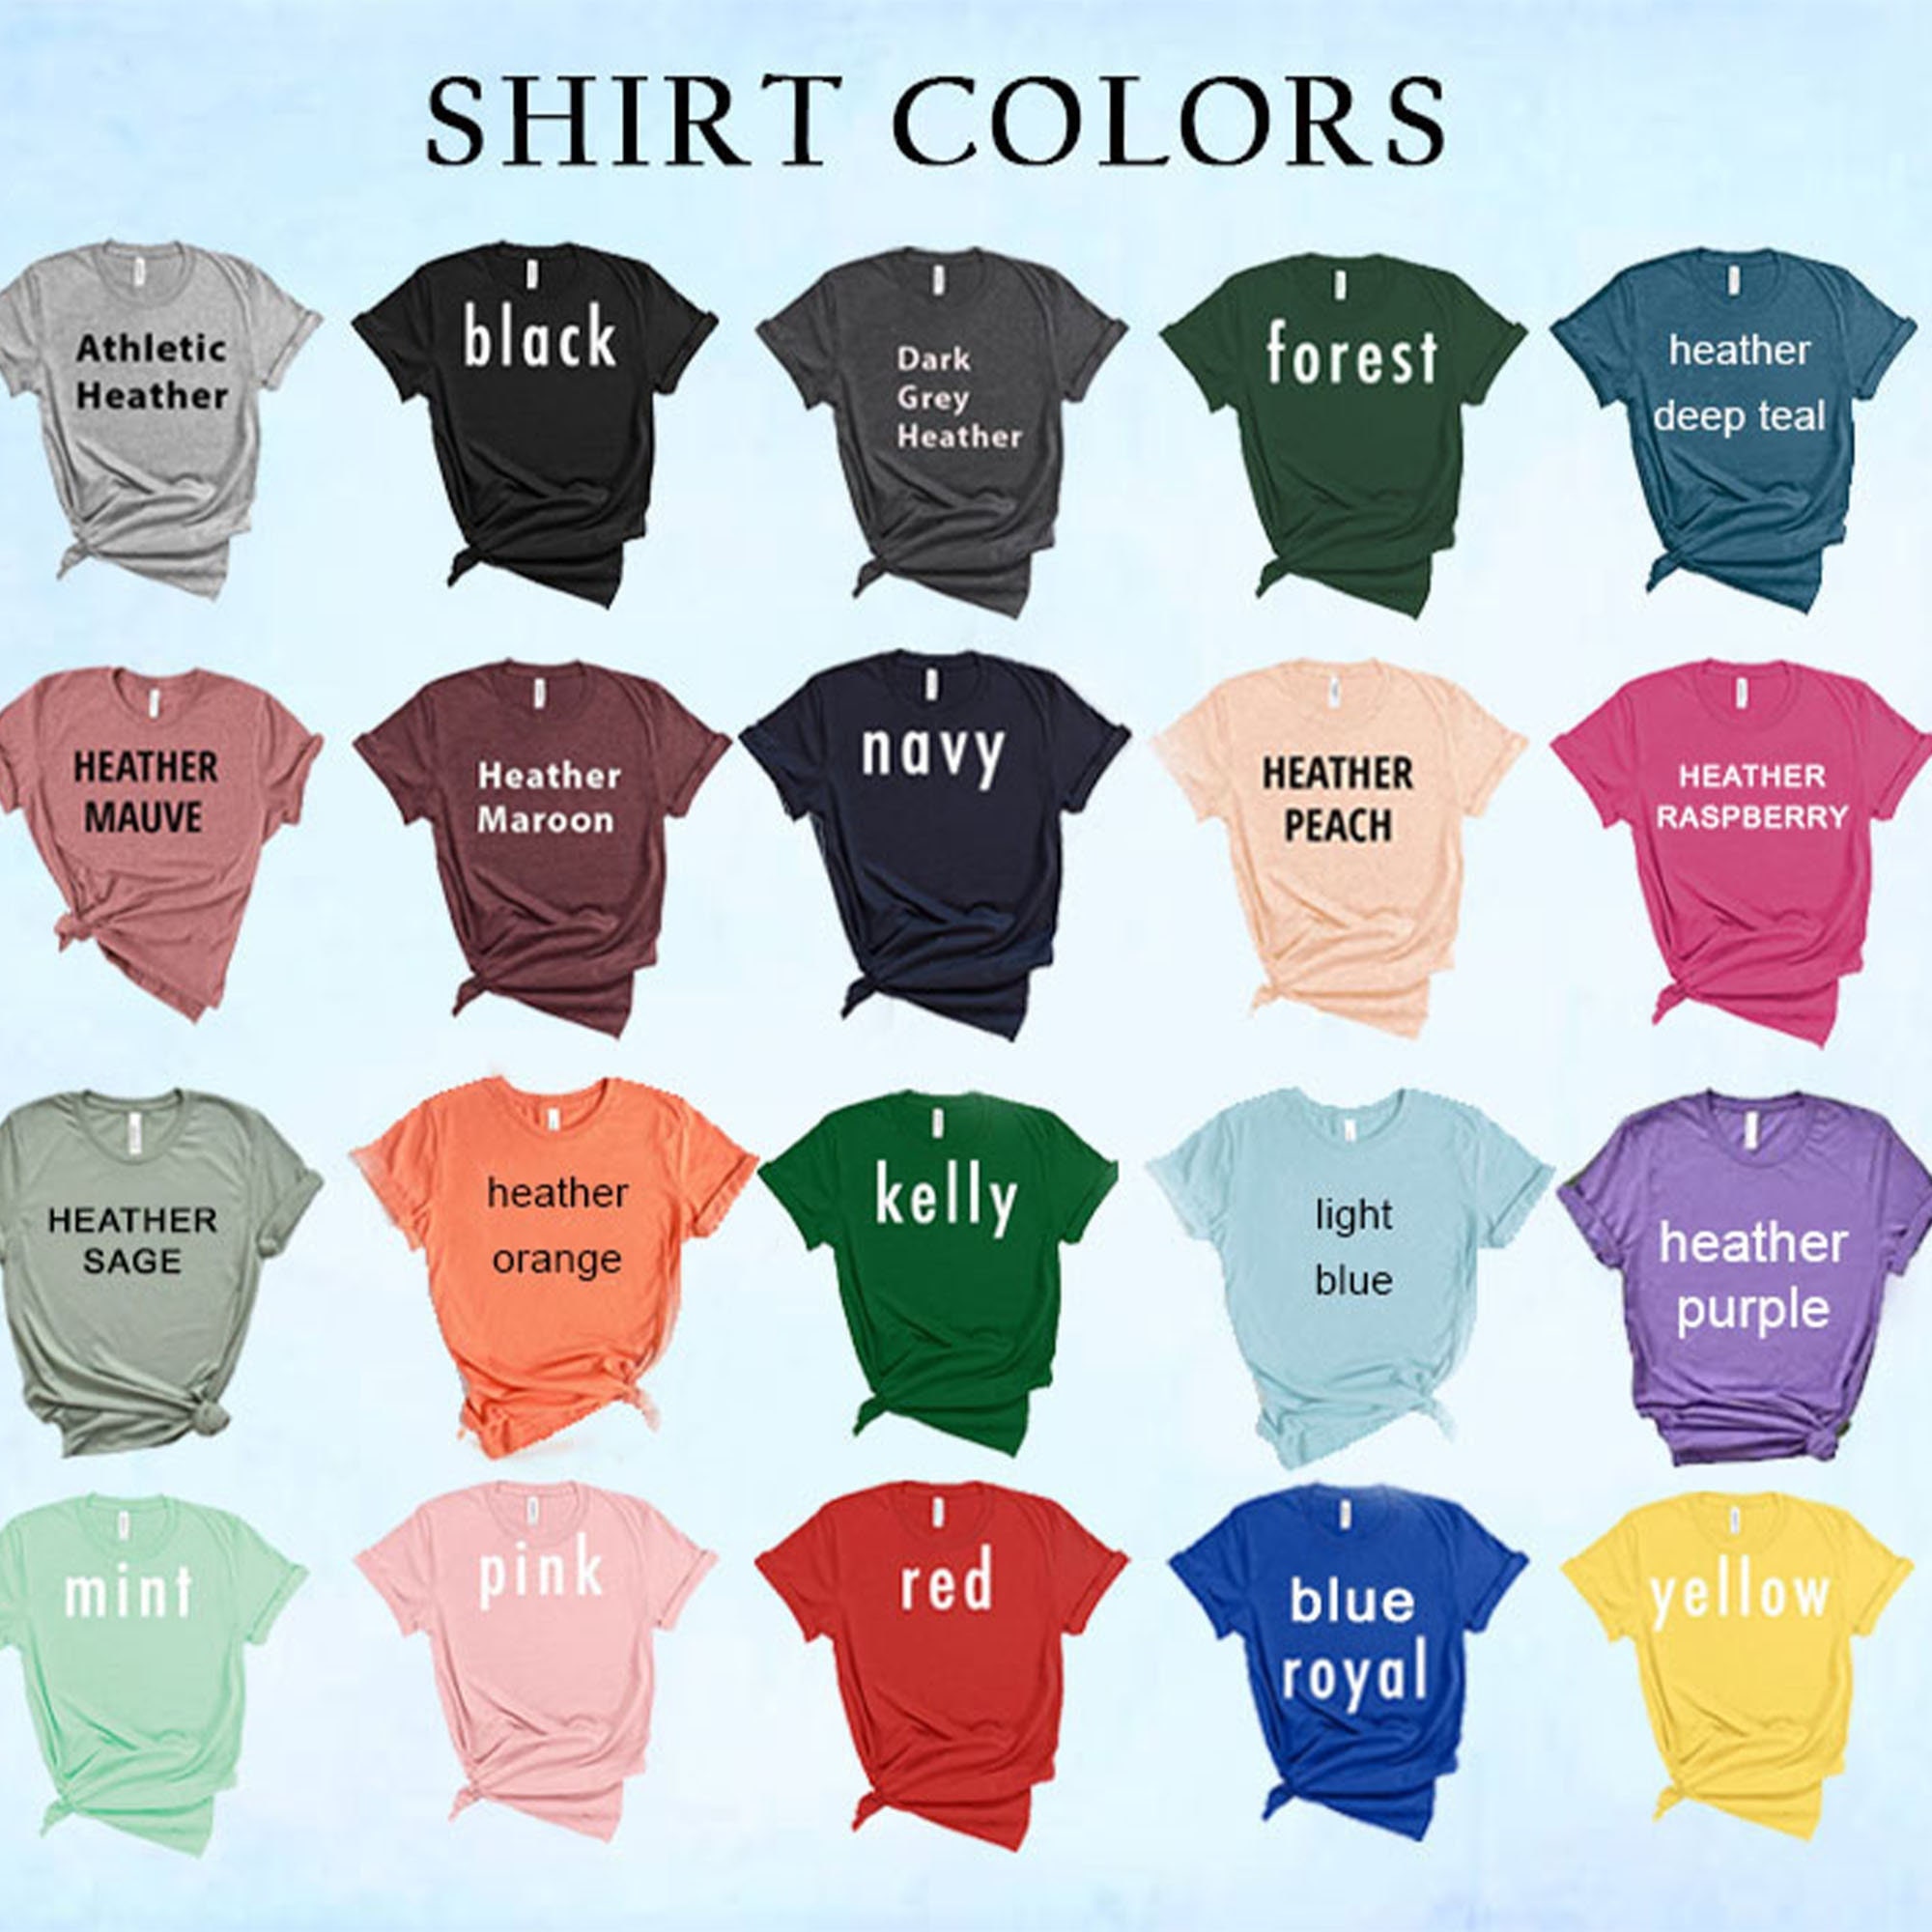 Discover Winnie the pooh inspired shirt, disney family shirts, disney group shirts, disney inspired shirt, family disney shirts, group shirts, pooh